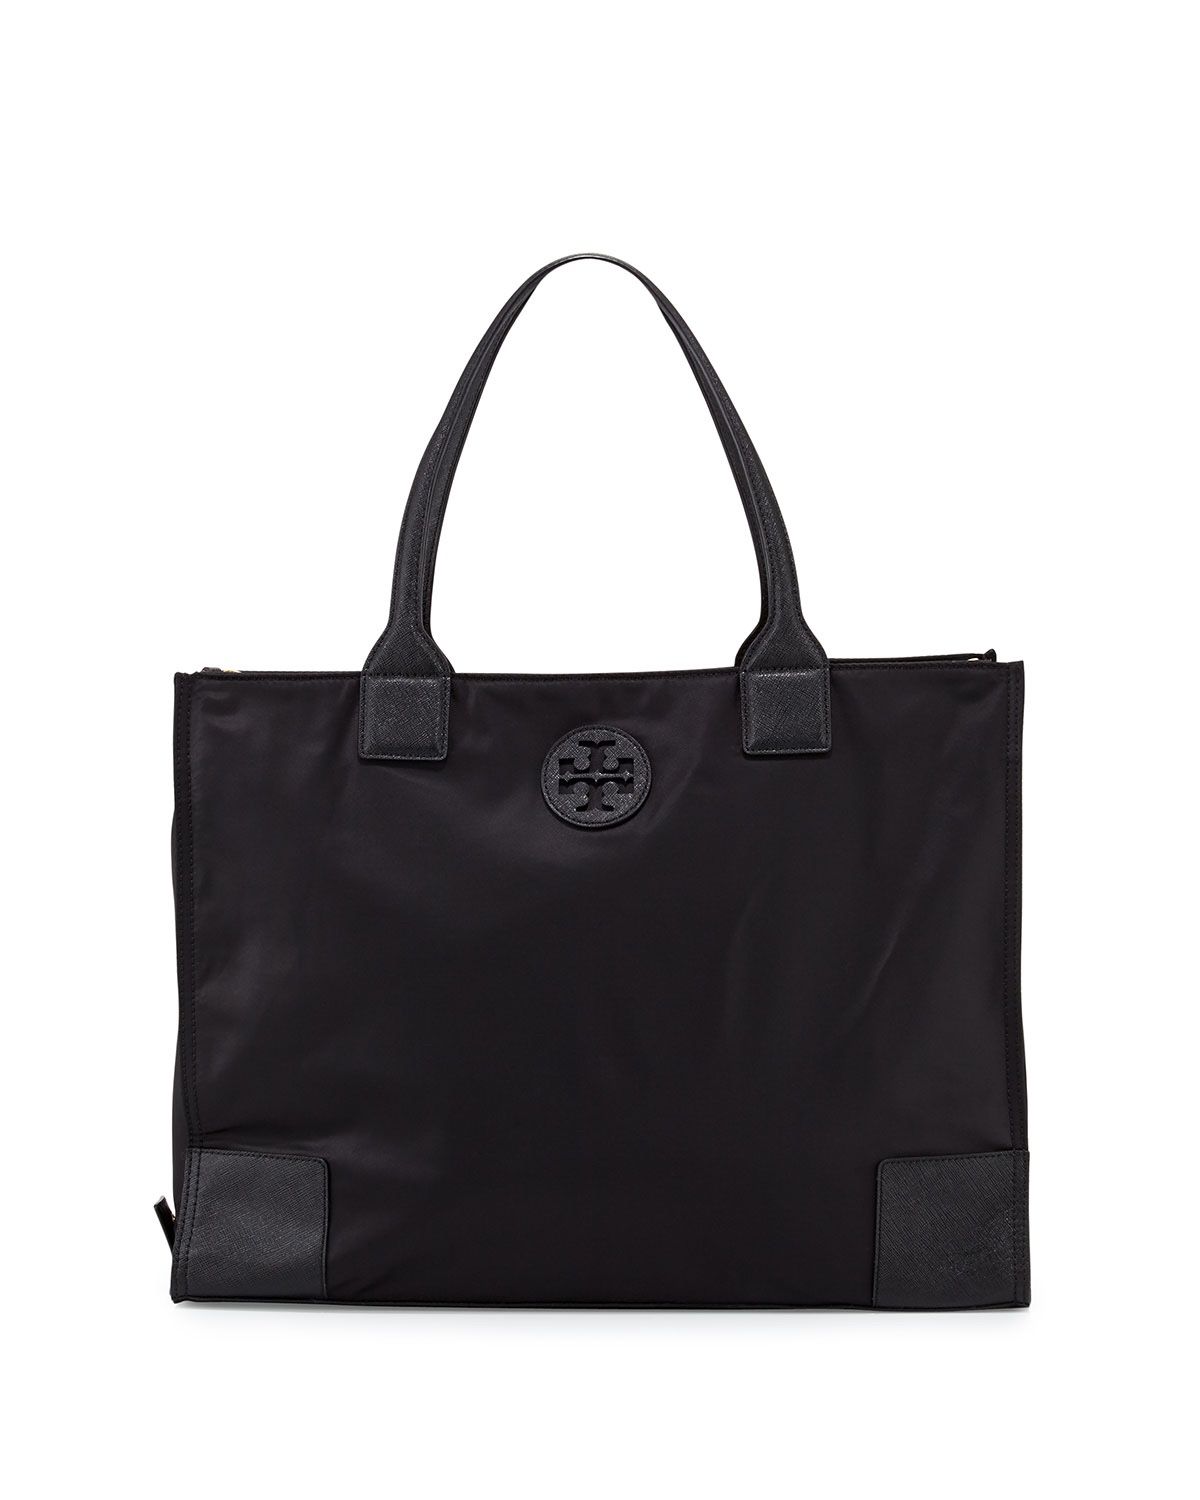 Tory Burch packable tote